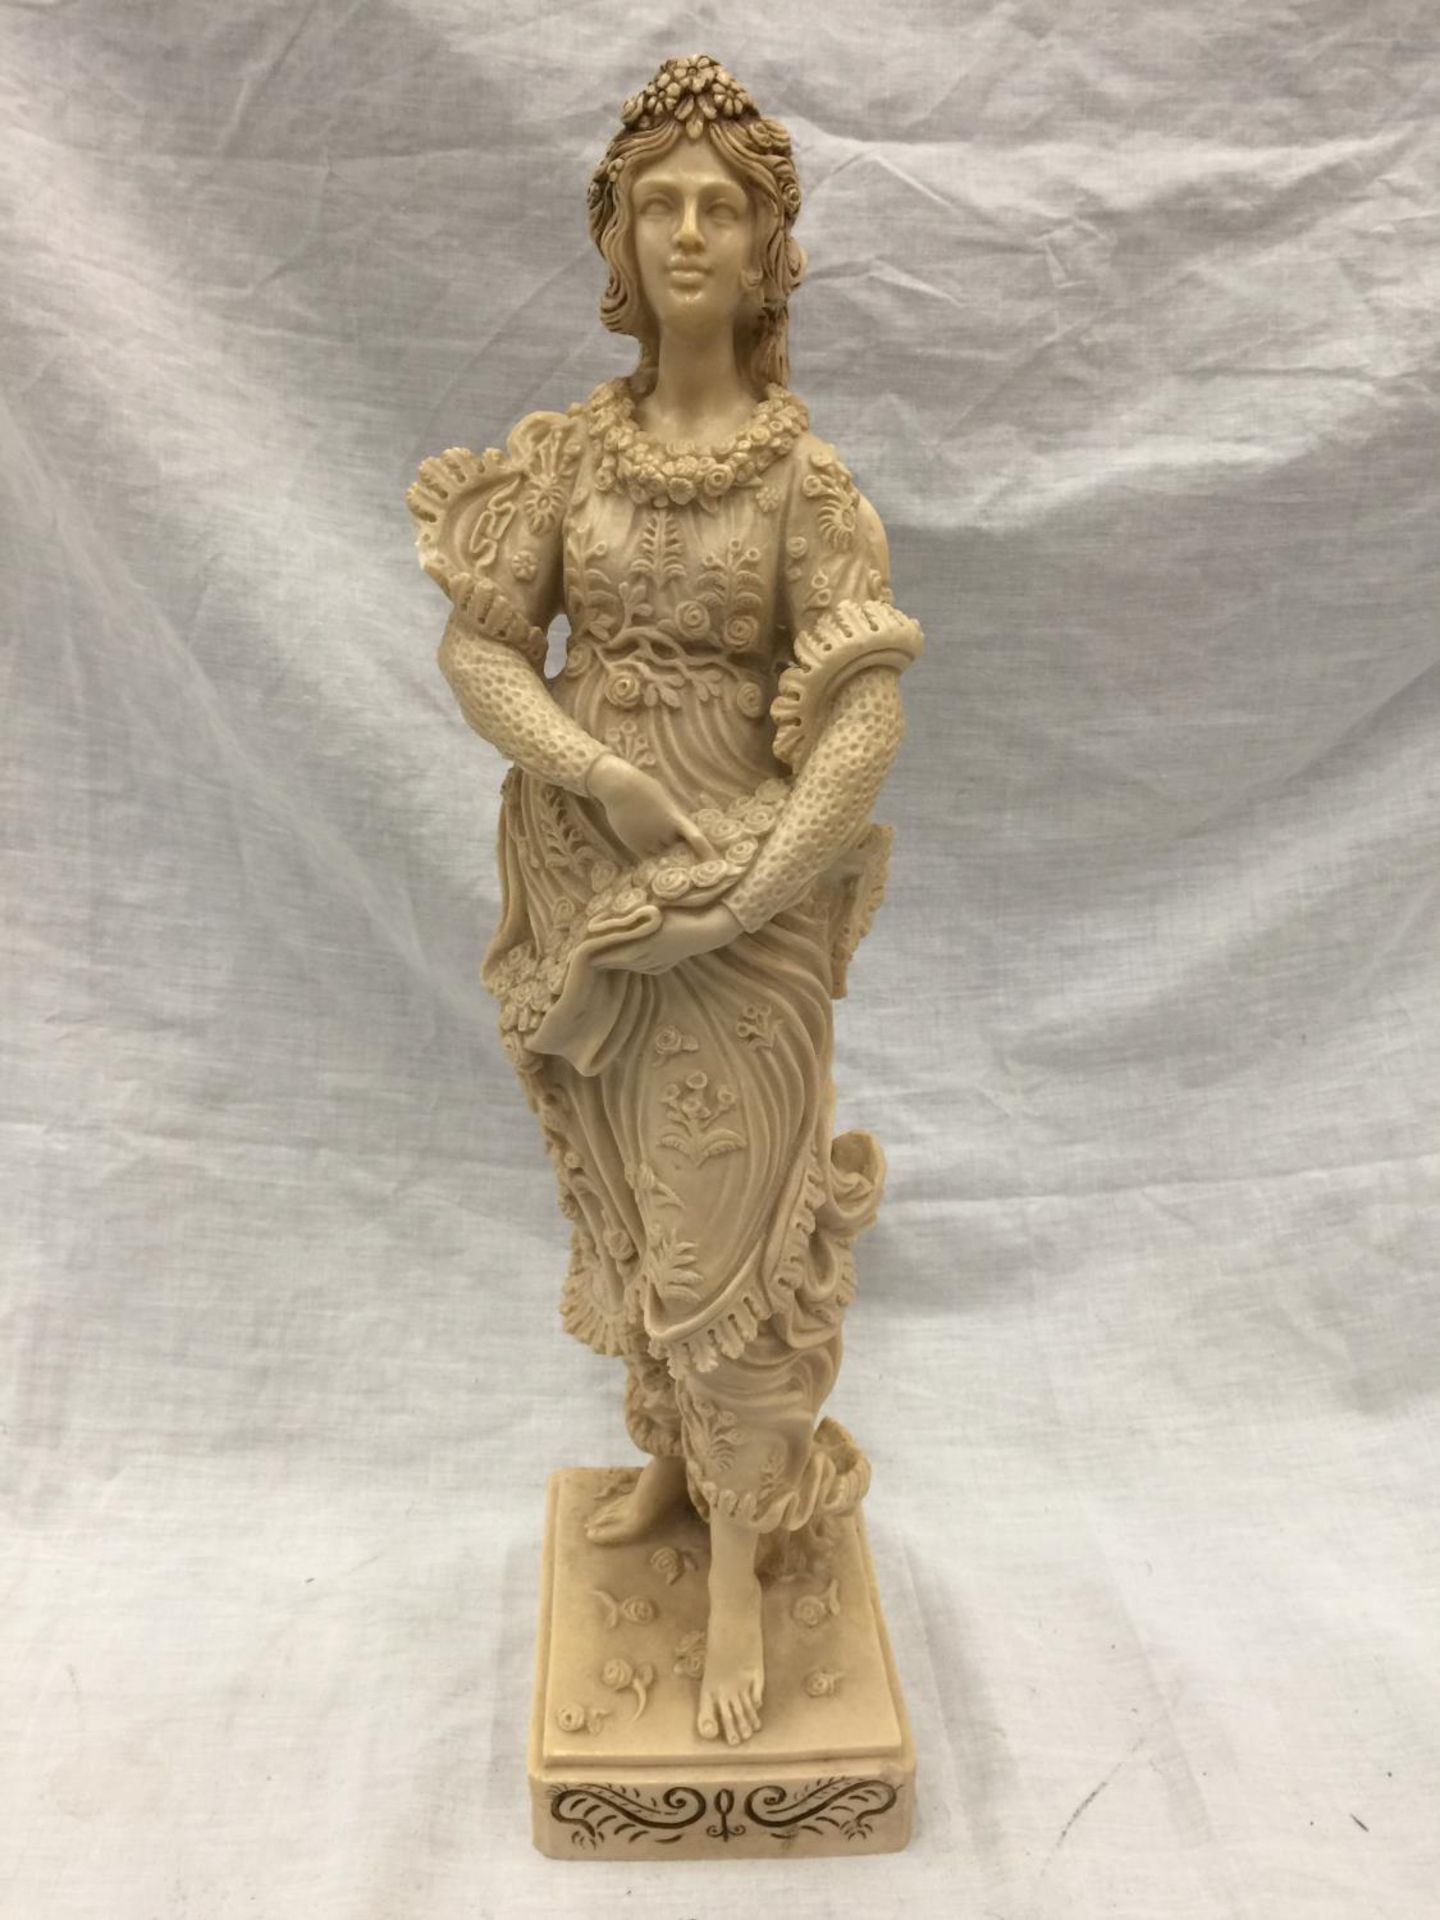 A CARVED RESIN FIGURE OF A GIRL WITH FLOWERS